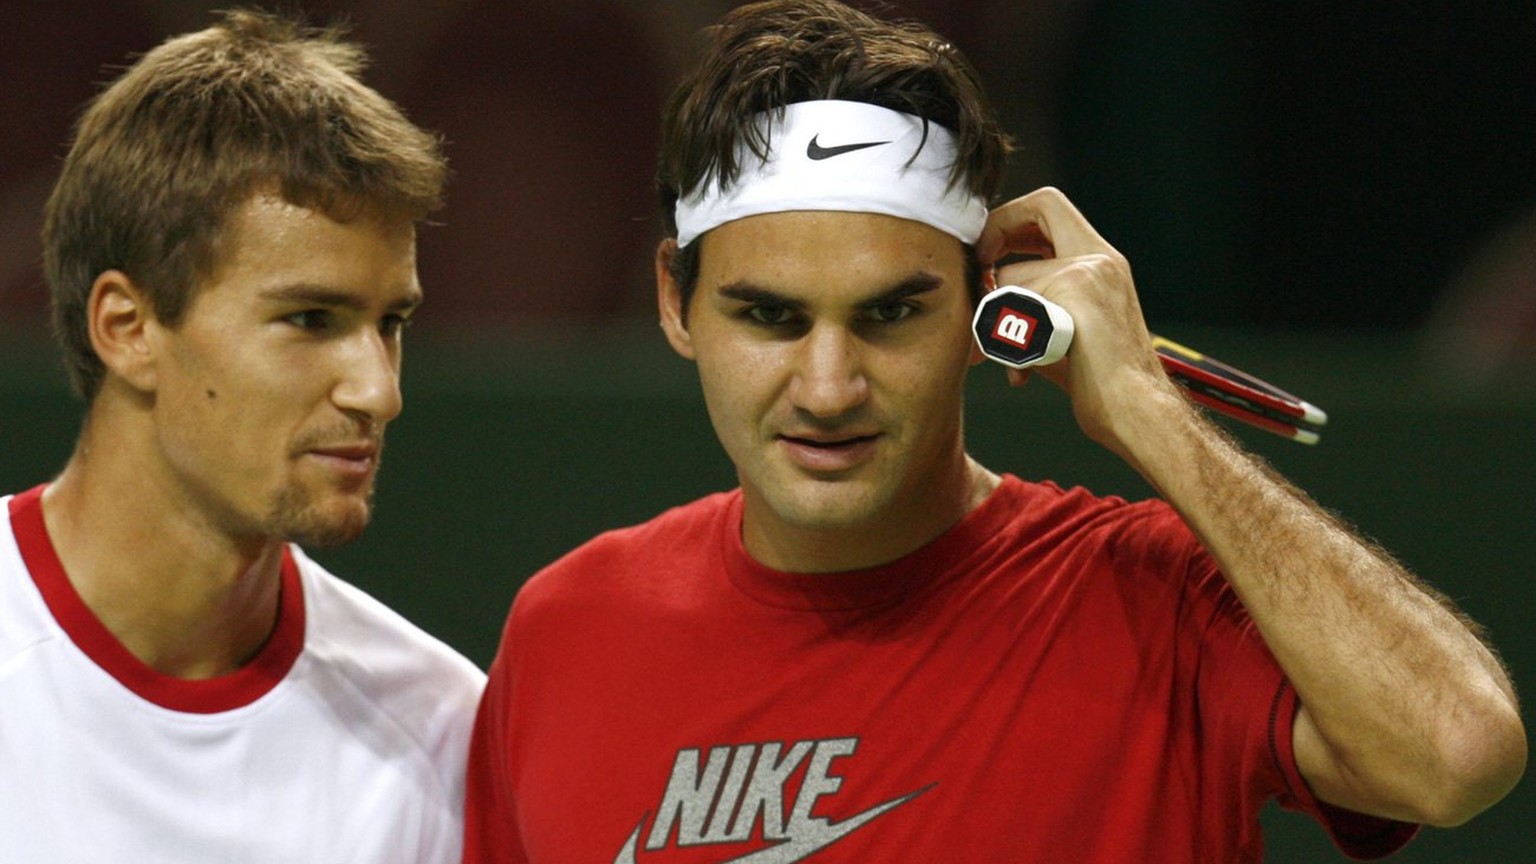 World number one tennis player Roger Federer of Switzerland, right, and teammate Marco Chiudinelli, left, speak together during the first training session before their Davis Cup World Group Play-offs  ...